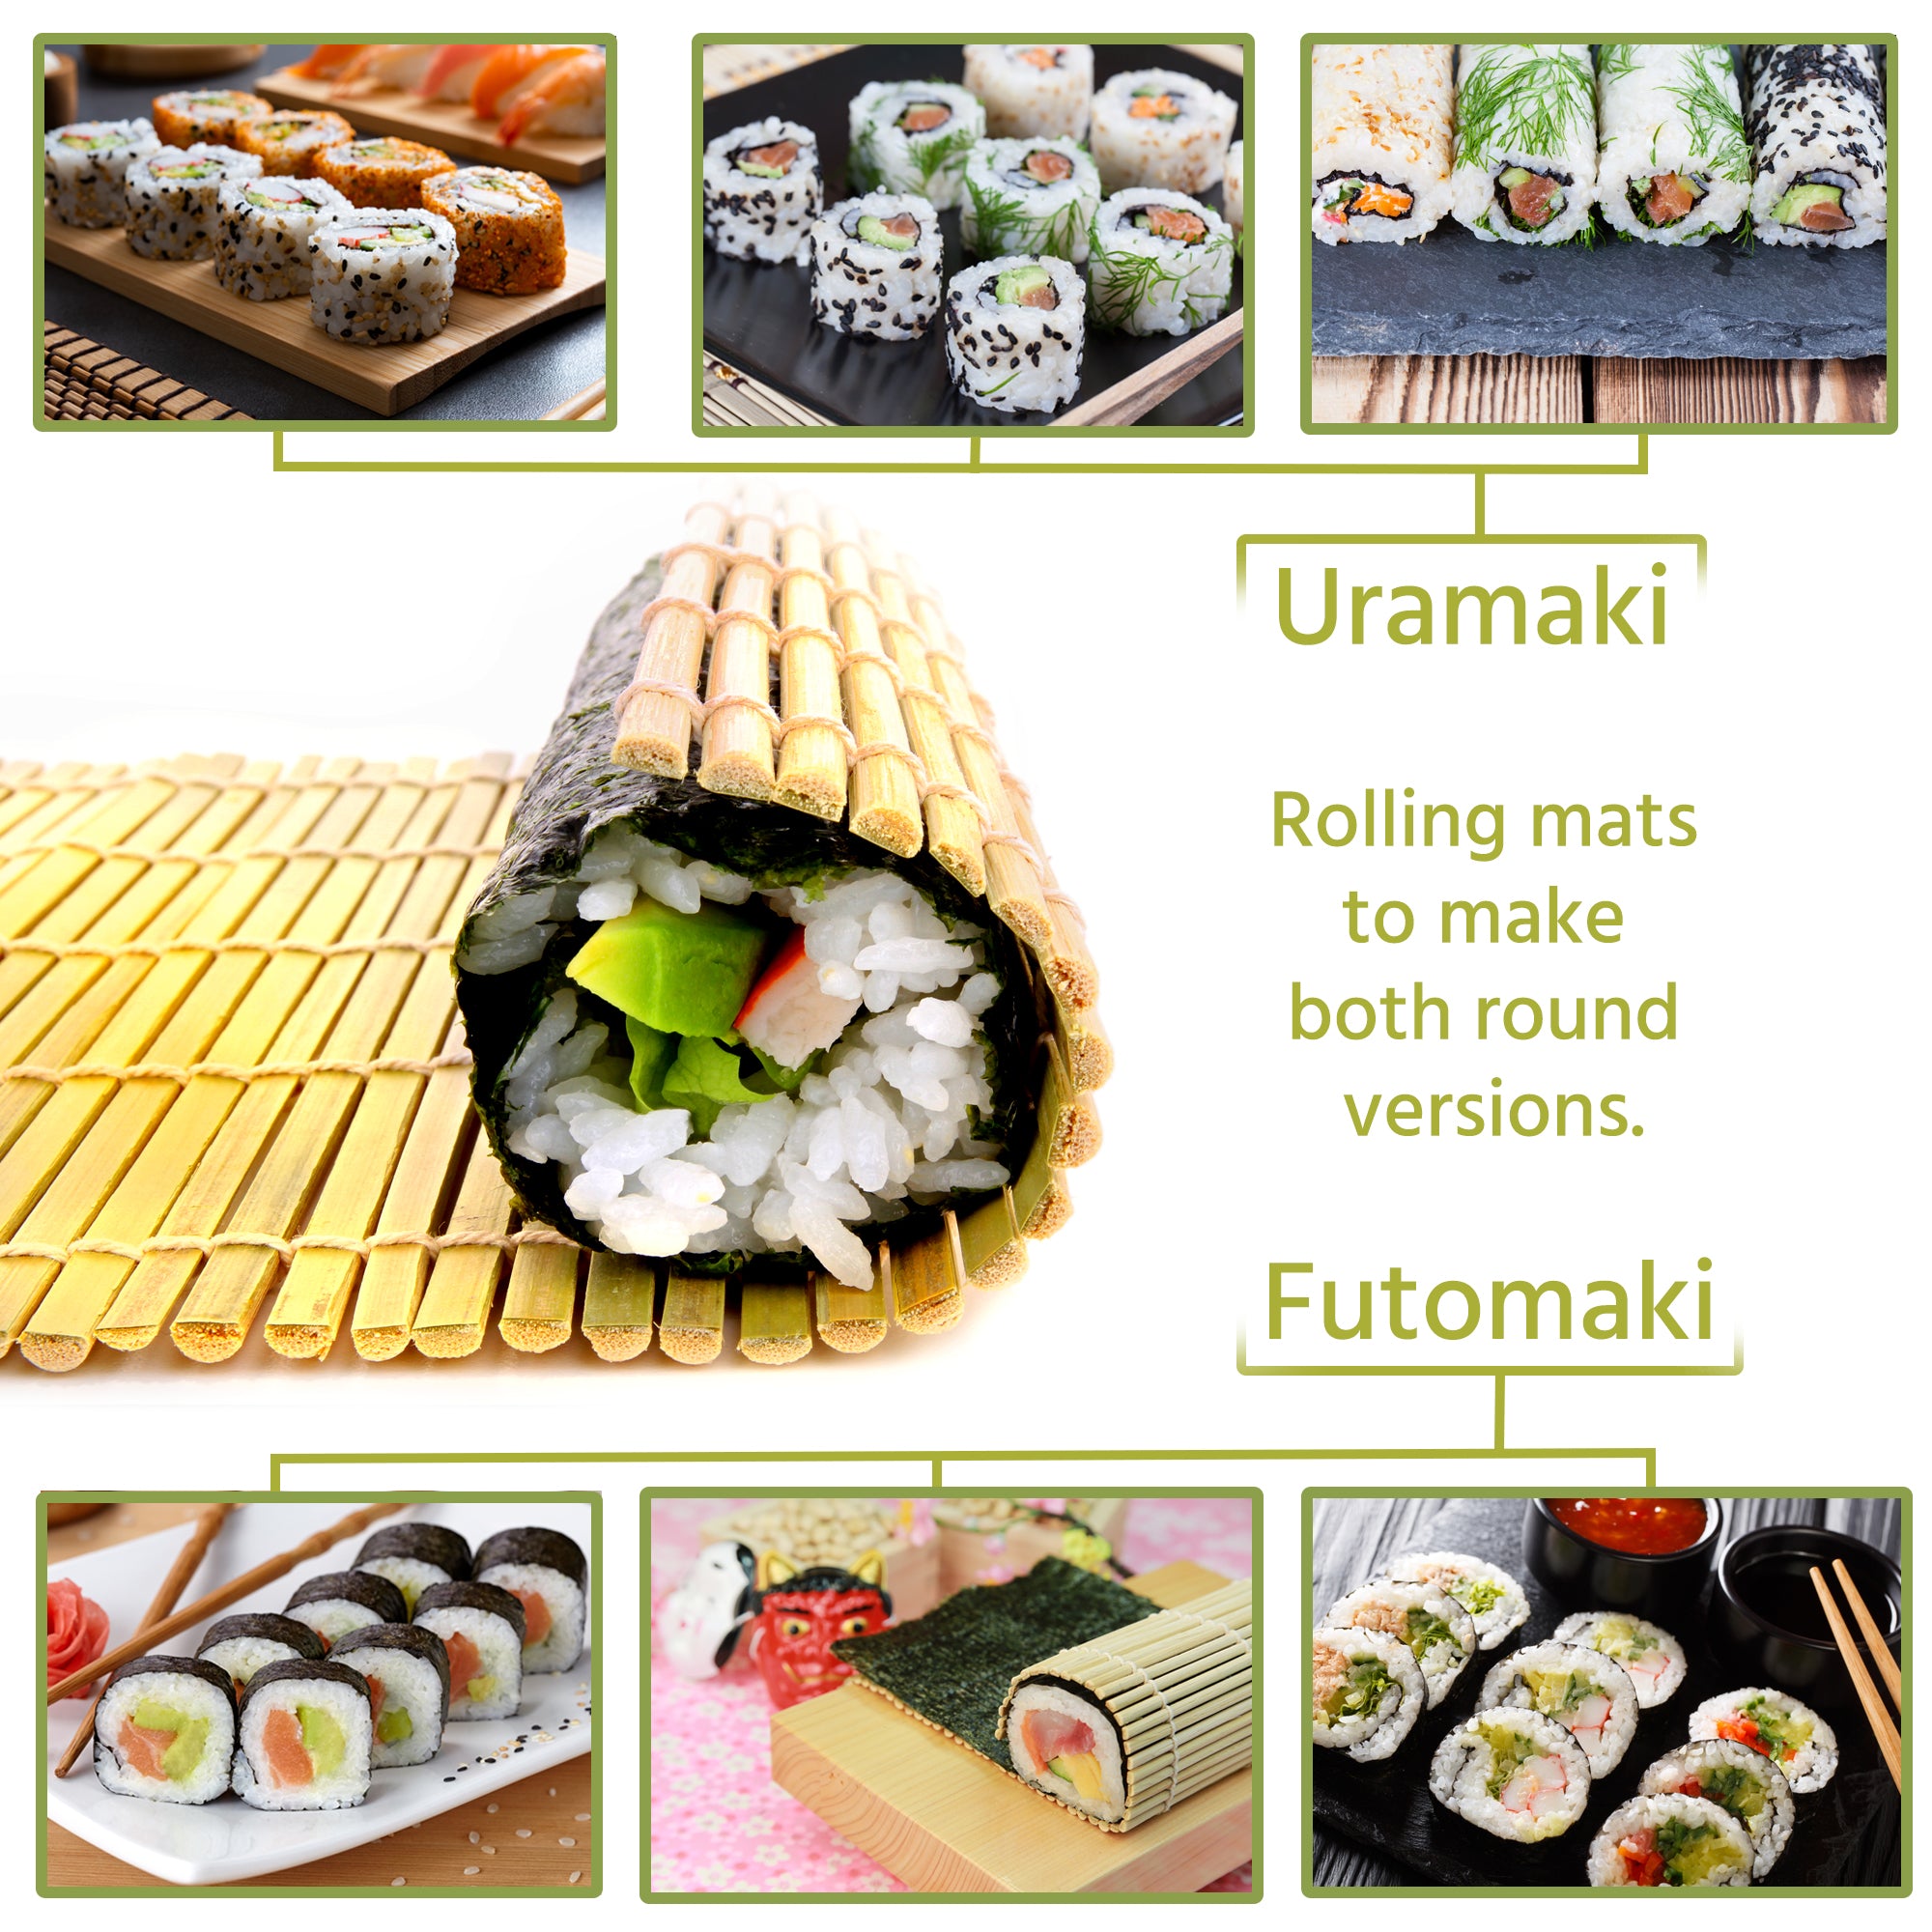 Grow Your Pantry Sushi and Maki Making Kit - with Sushi Rolling Mat, Bamboo Maki Mold and Japanese Sauce Tray. Plus Chopsticks and Spreader paddles. T